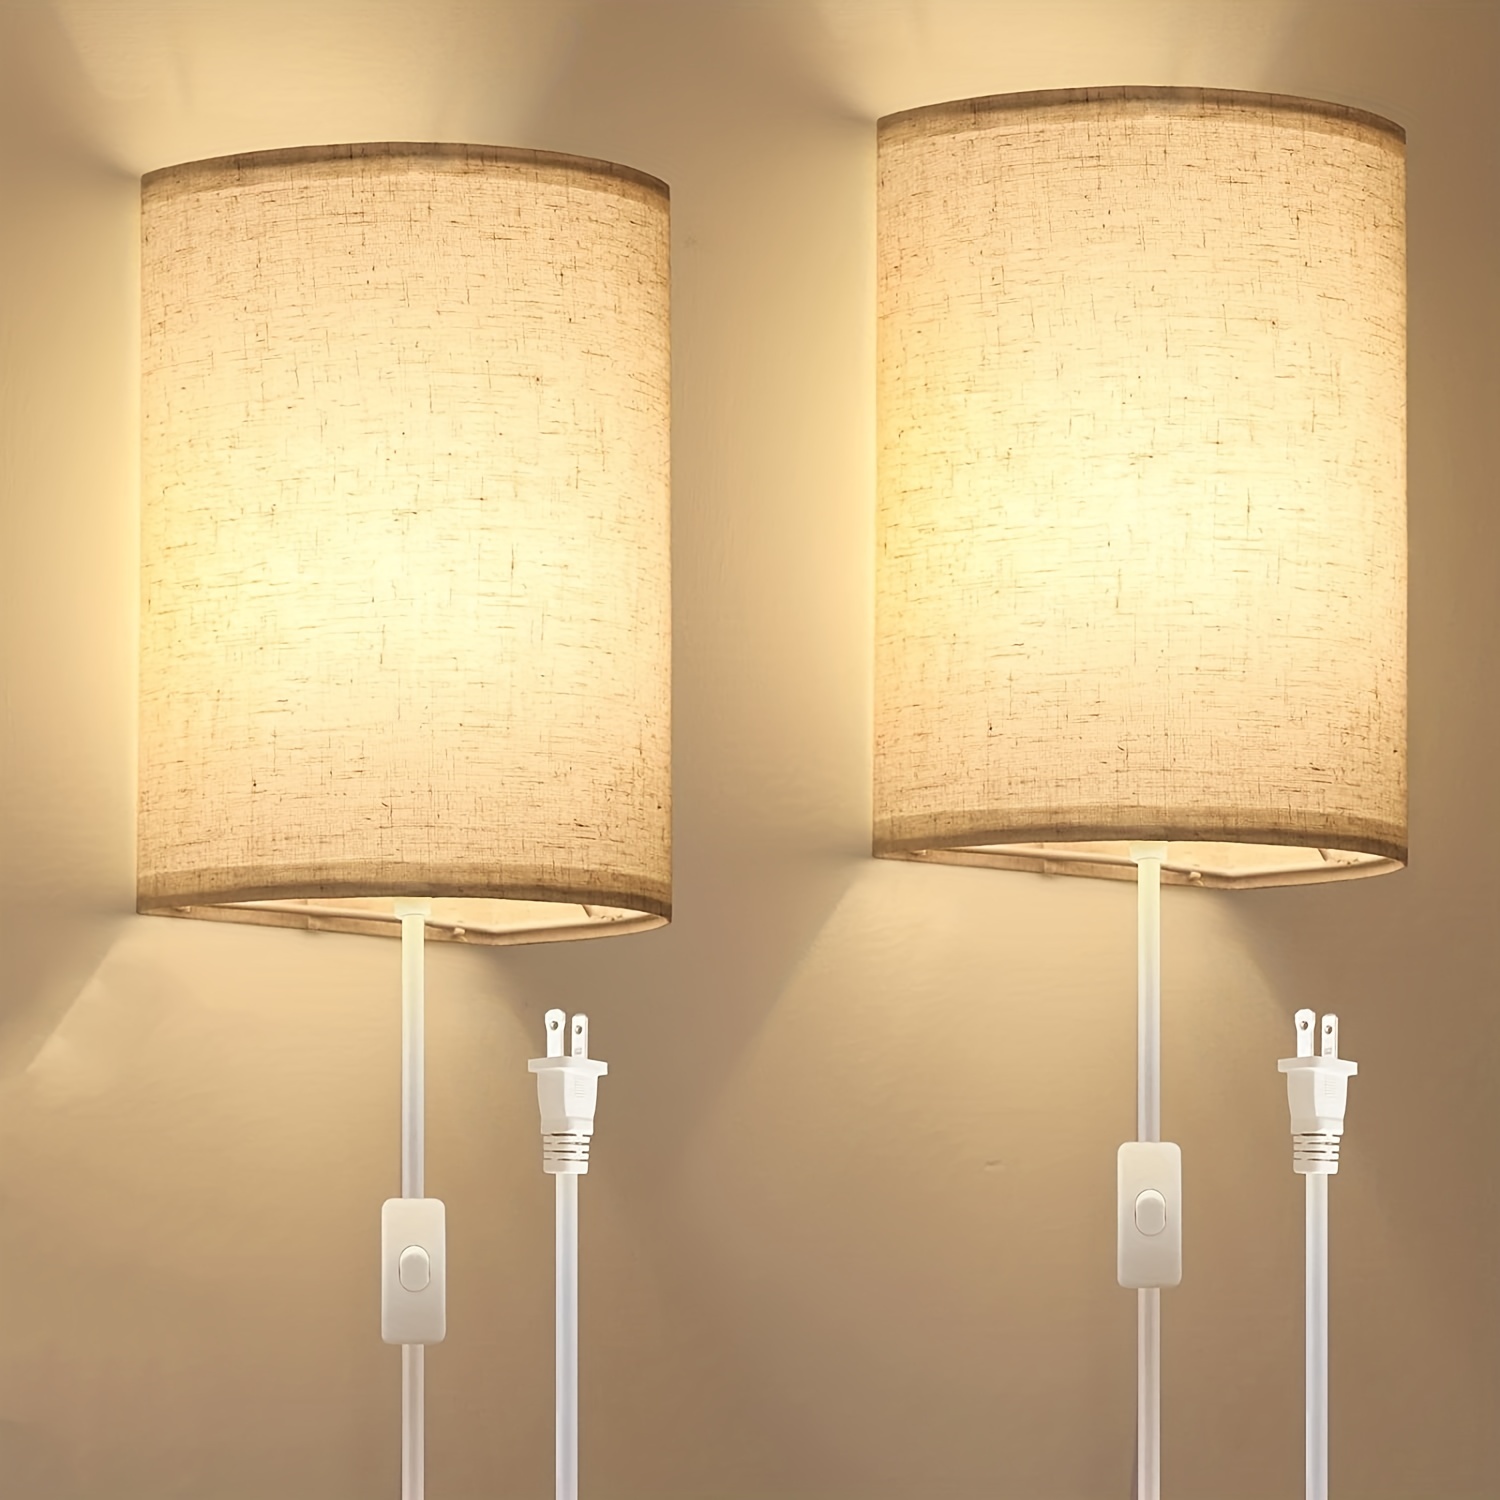 Wall light bedroom light reading lamp extendable beige plug connection, ETC Shop: lamps, furniture, technology, household. All from one source.